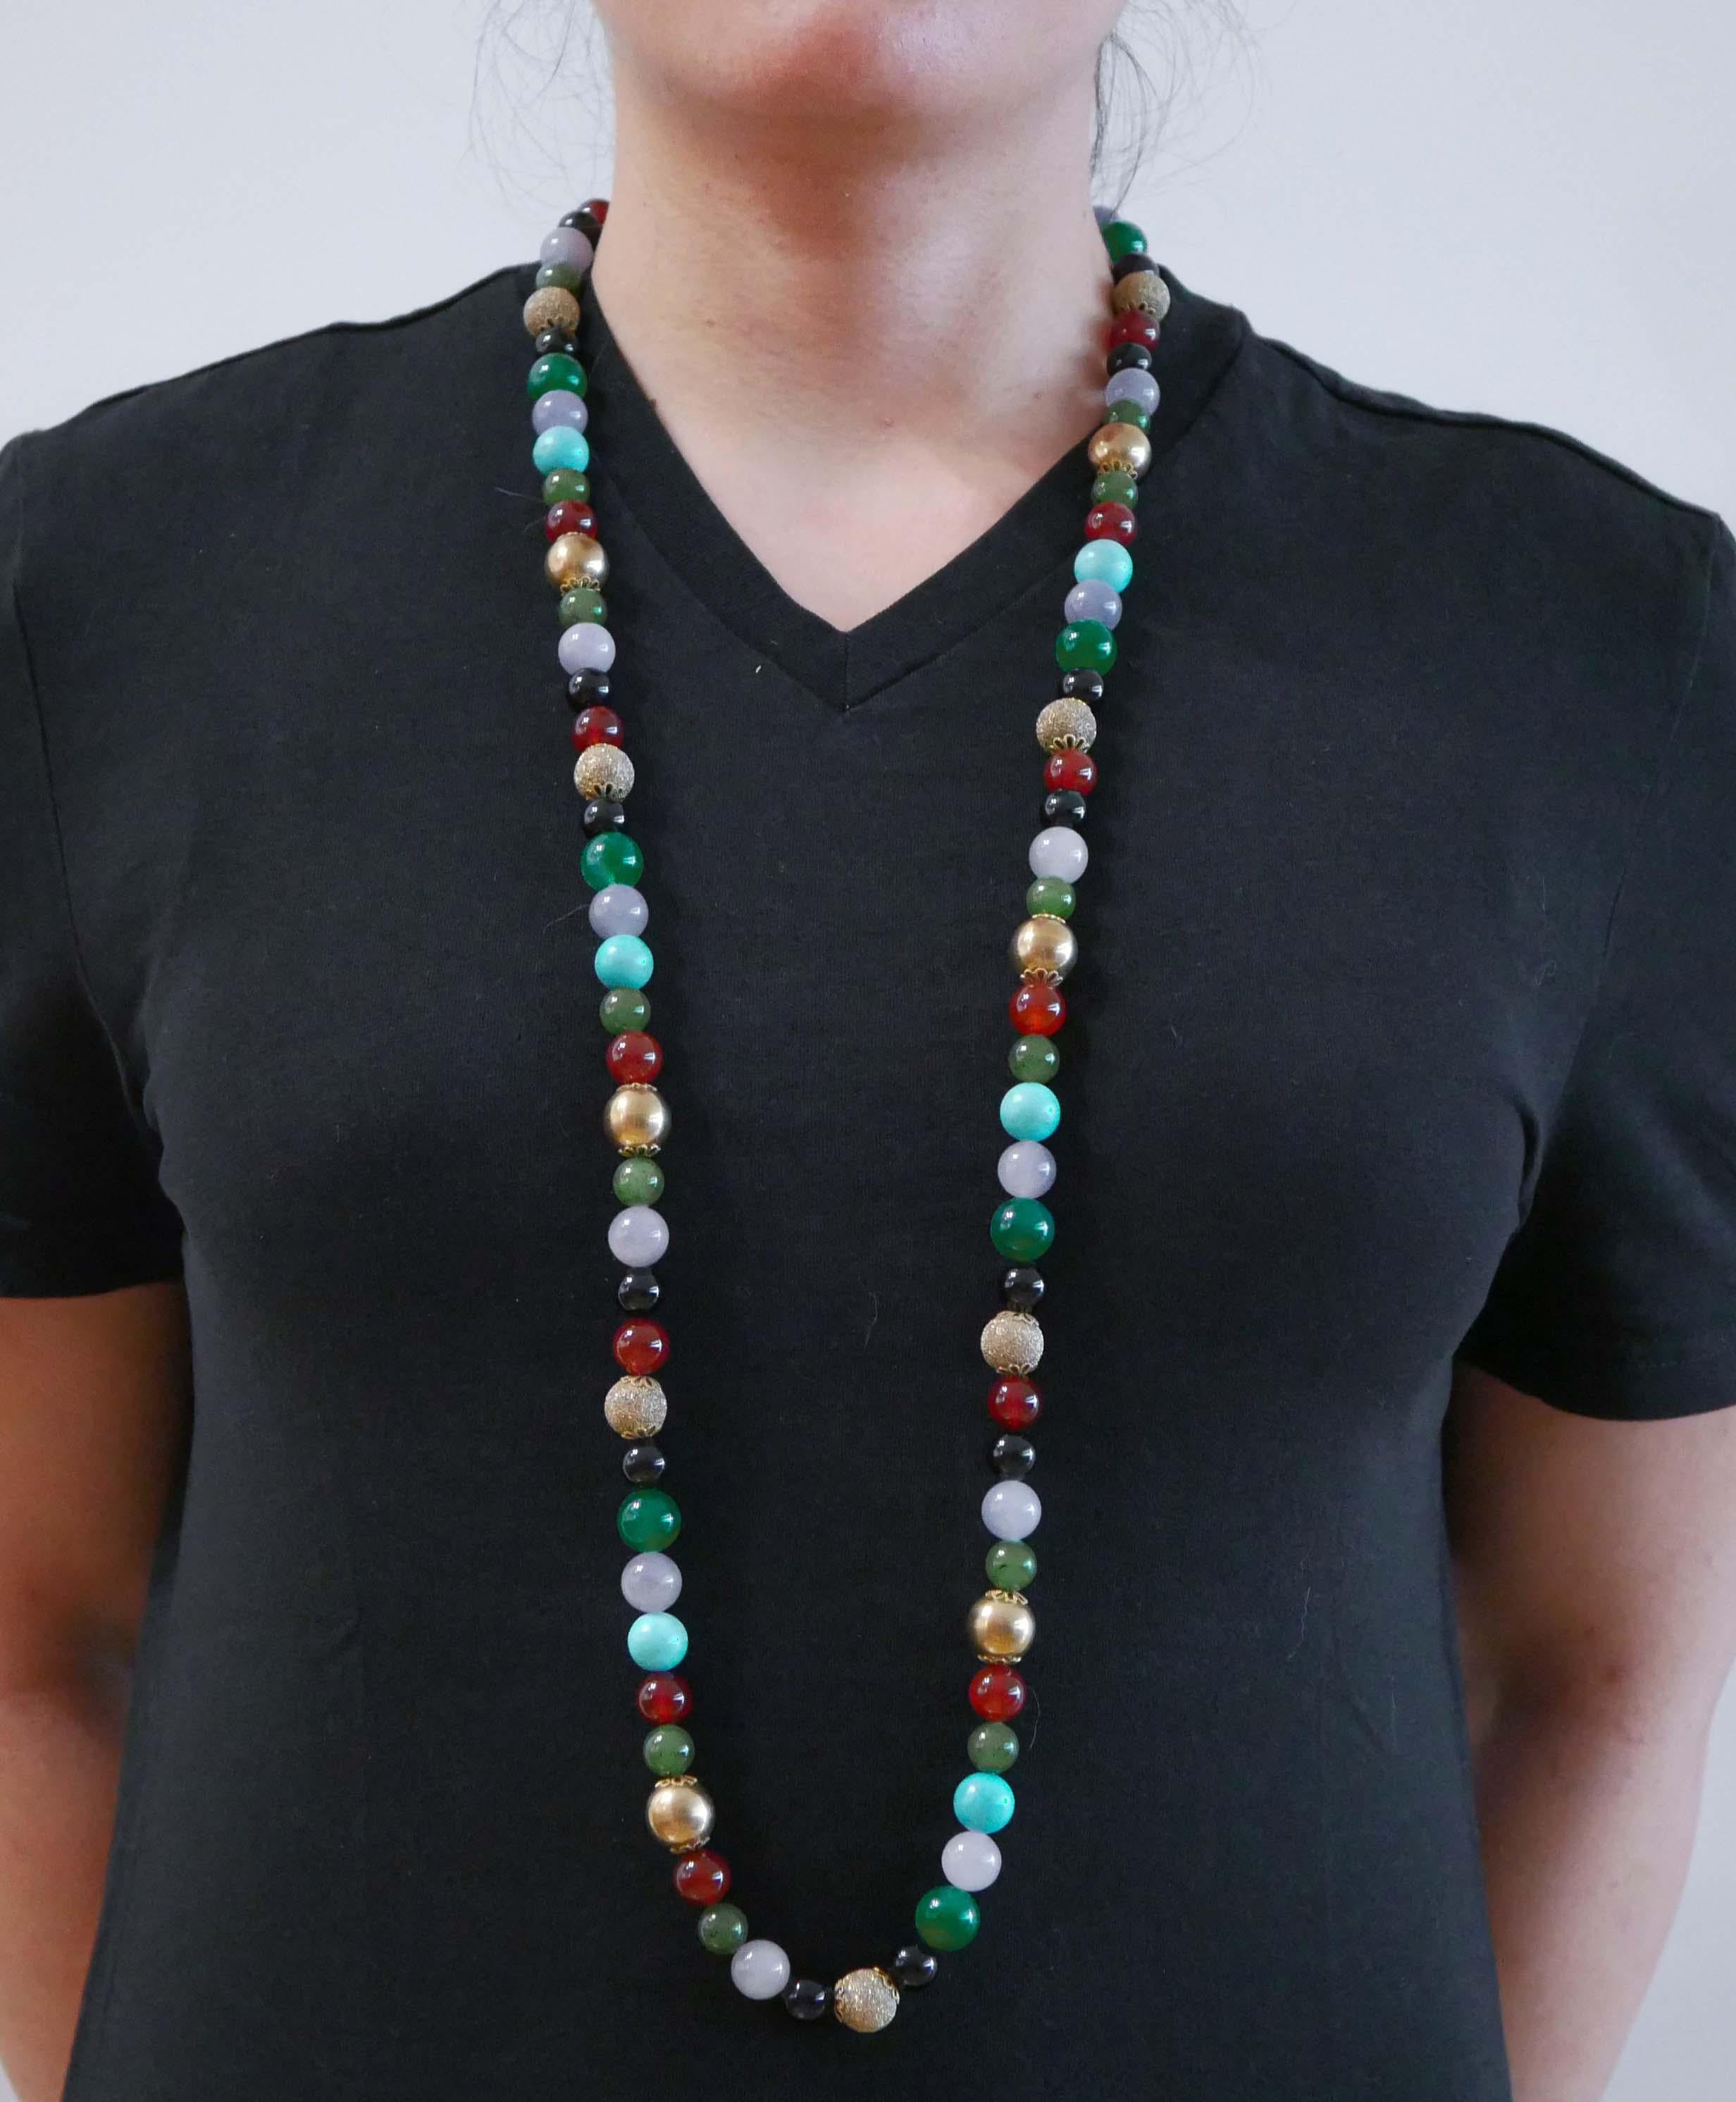 Round Cut Carnelian, Turquoise, Onyx, Agate, Tourmaline, Rose Gold and Silver Necklace. For Sale